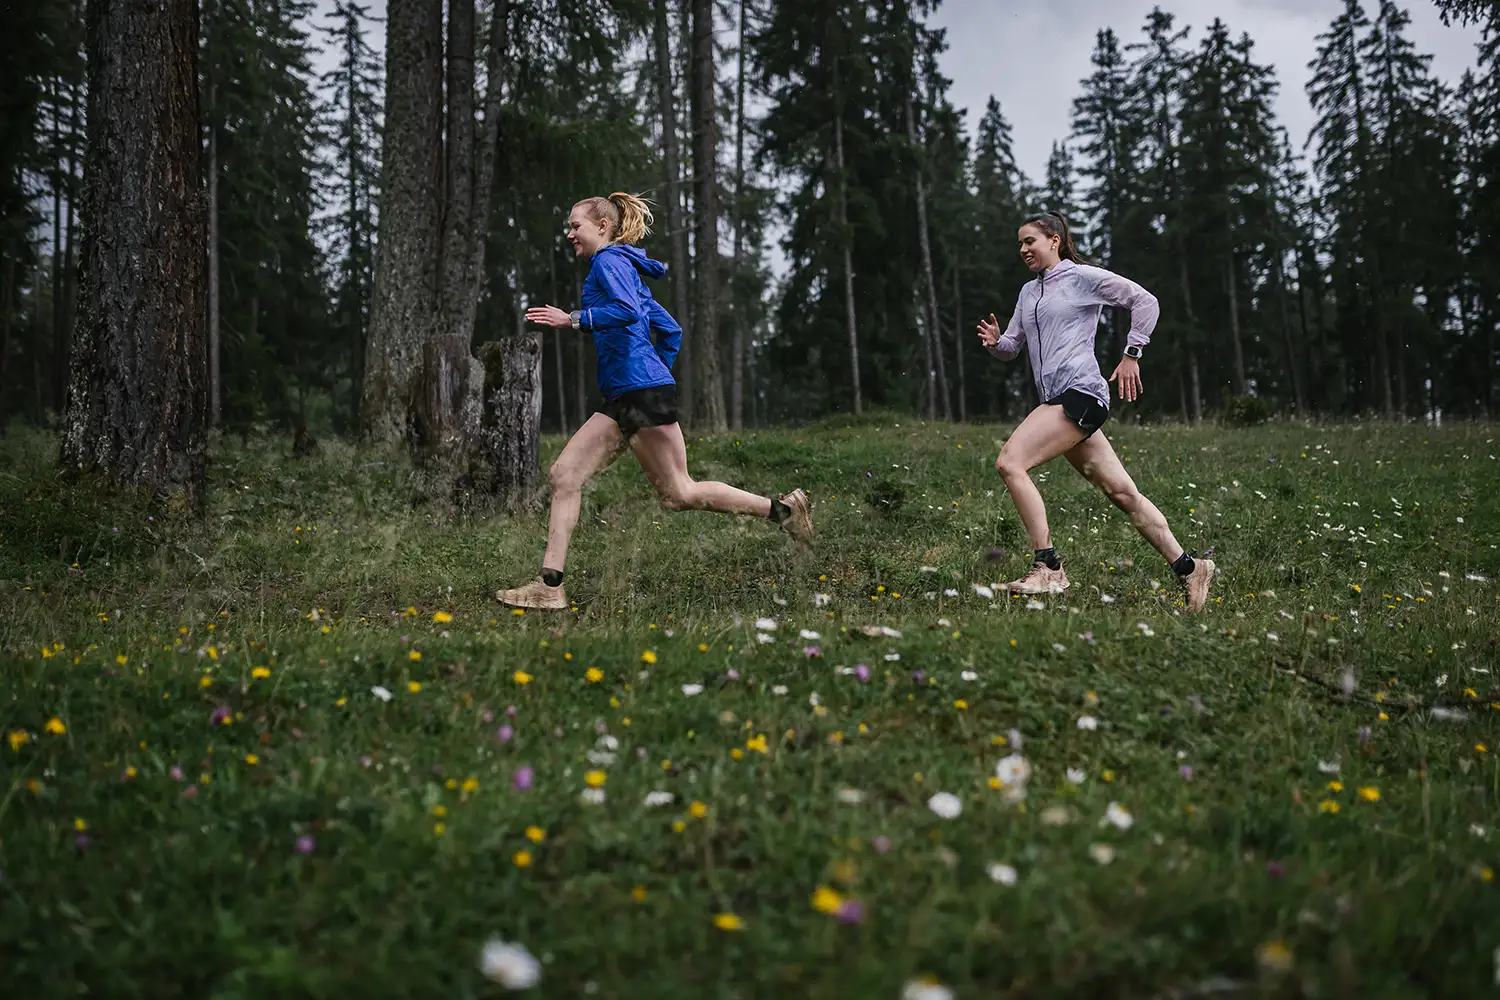 Two gals trail running